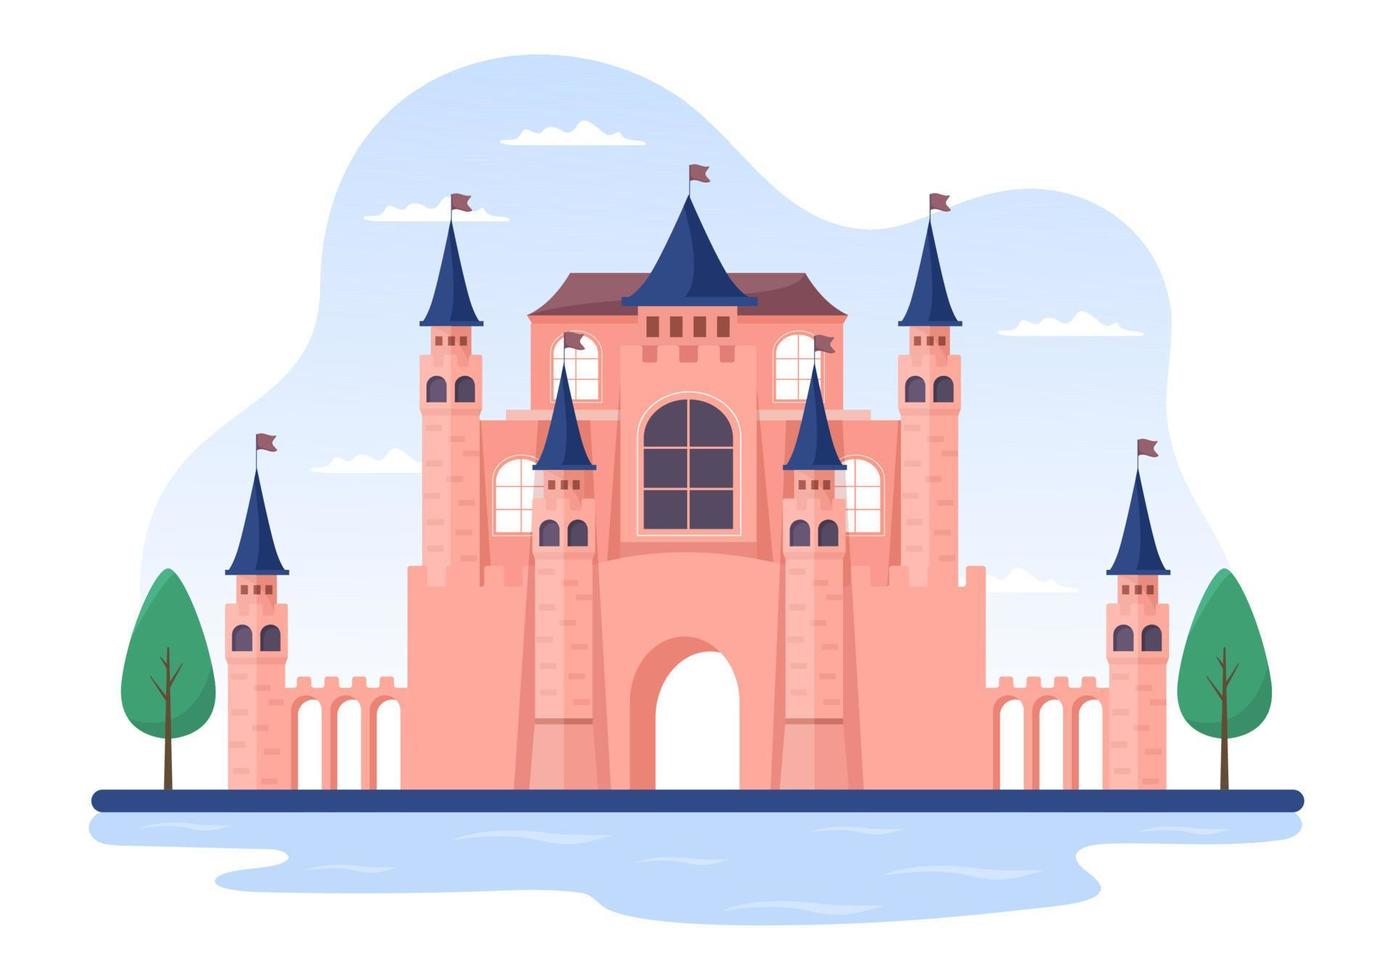 Castle with Majestic Palace Architecture and Fairytale Like Forest Scenery in Cartoon Flat Style Illustration vector